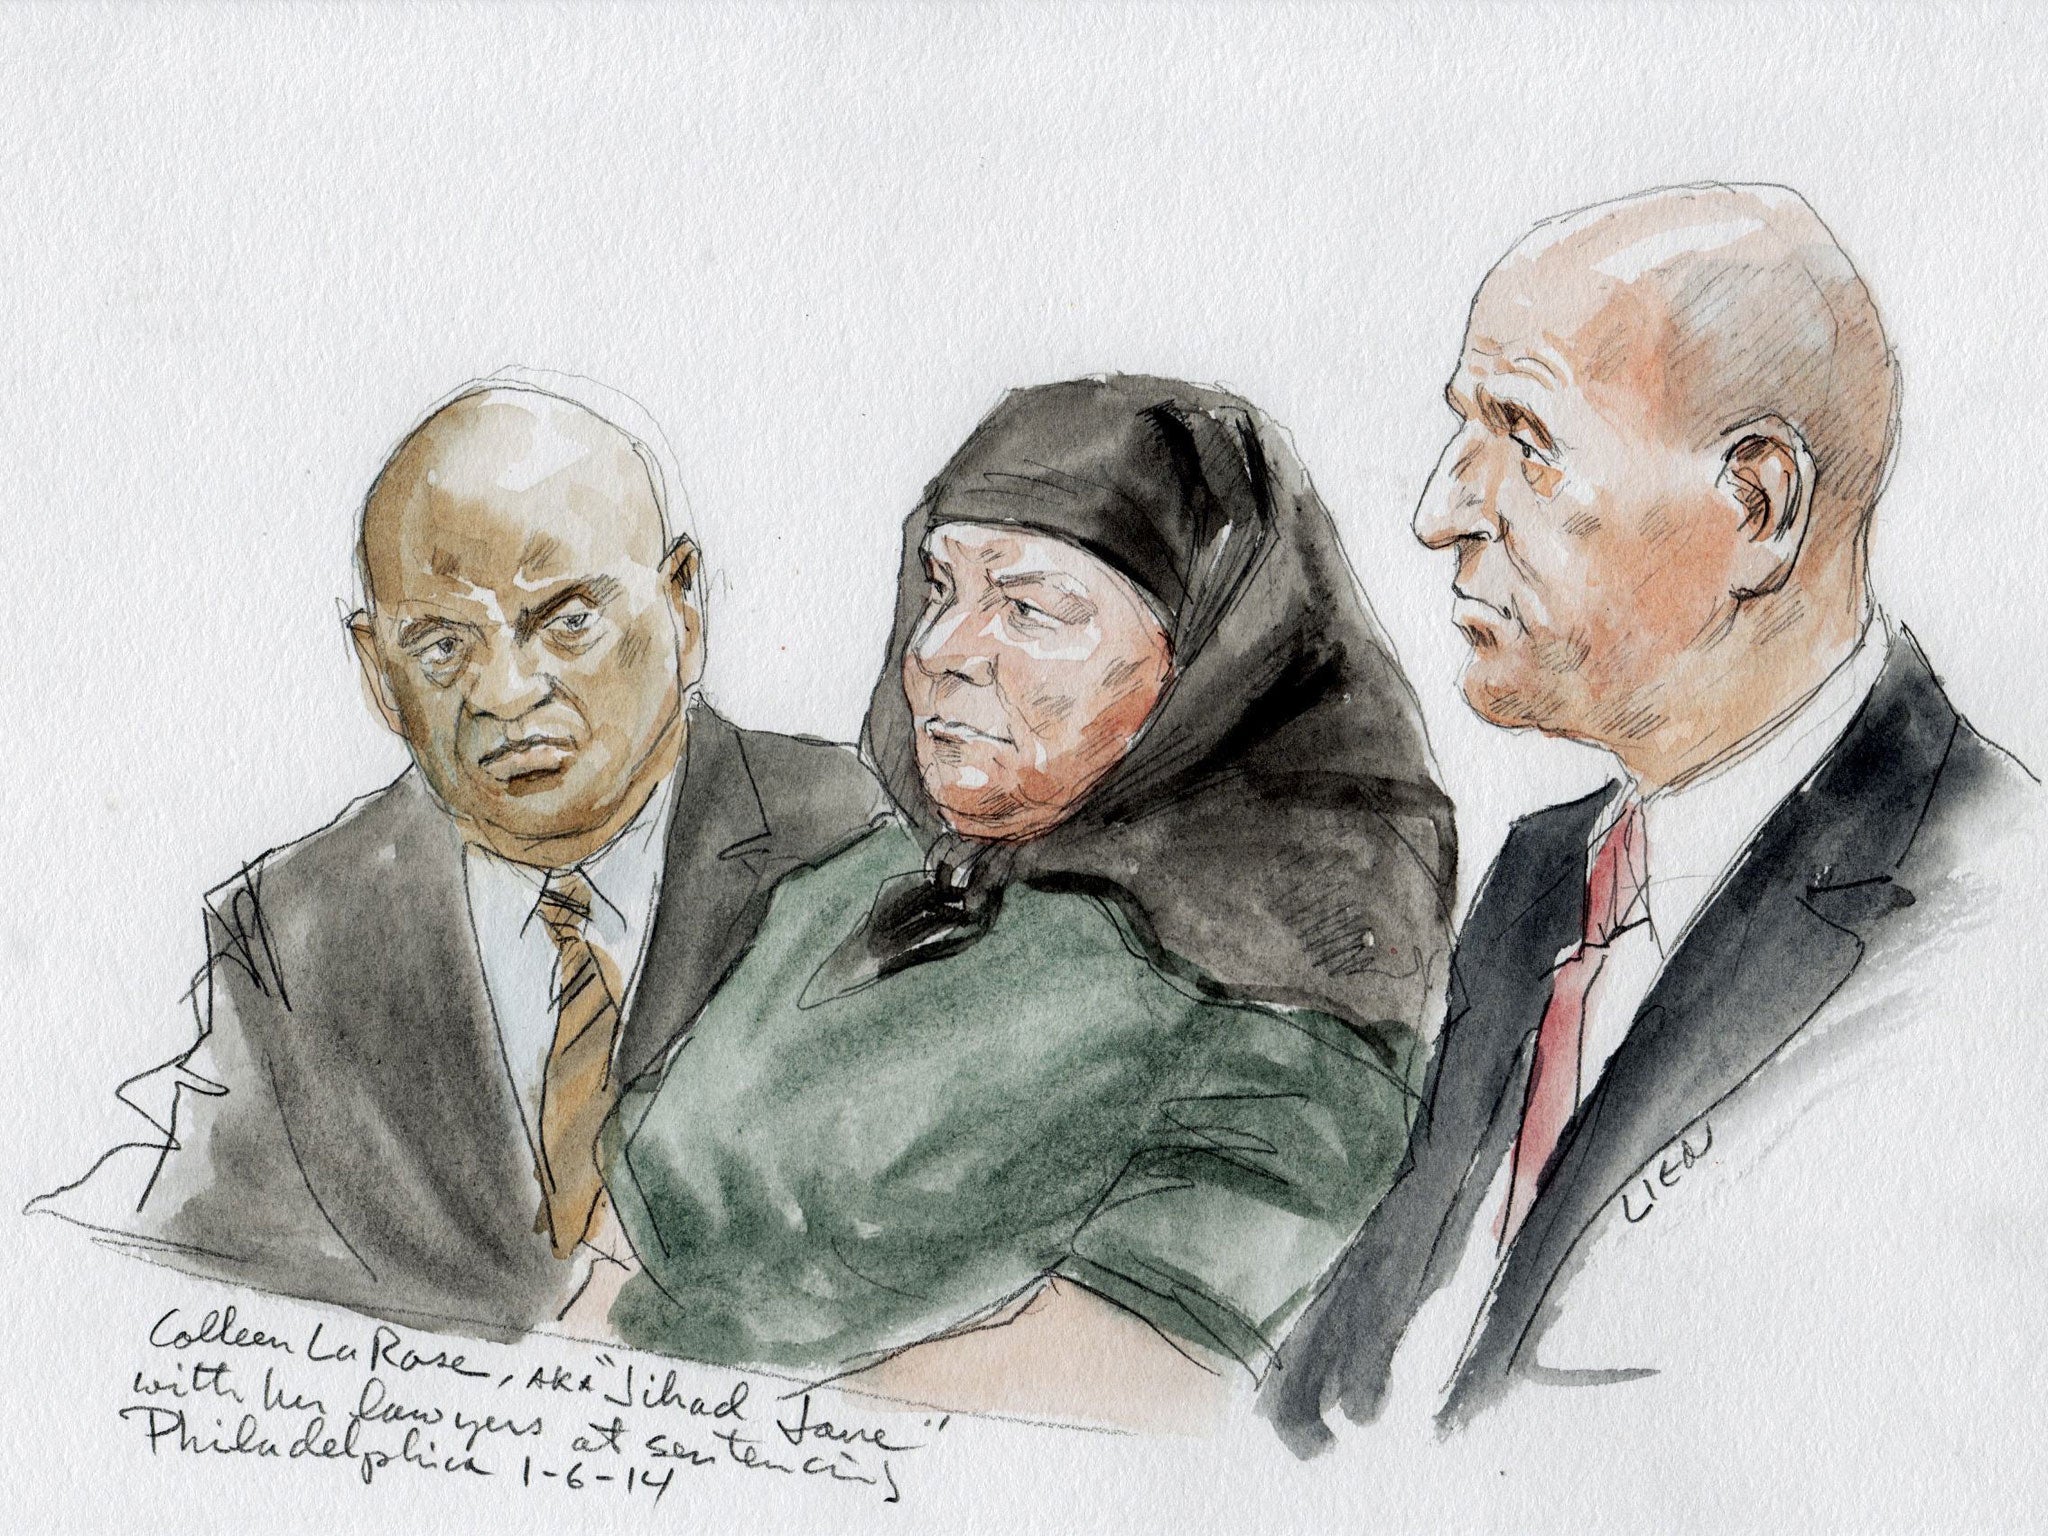 Colleen LaRose and her attorney Mark Wilson, right, are shown in this courtroom sketch during her sentencing hearing in Philadelphia